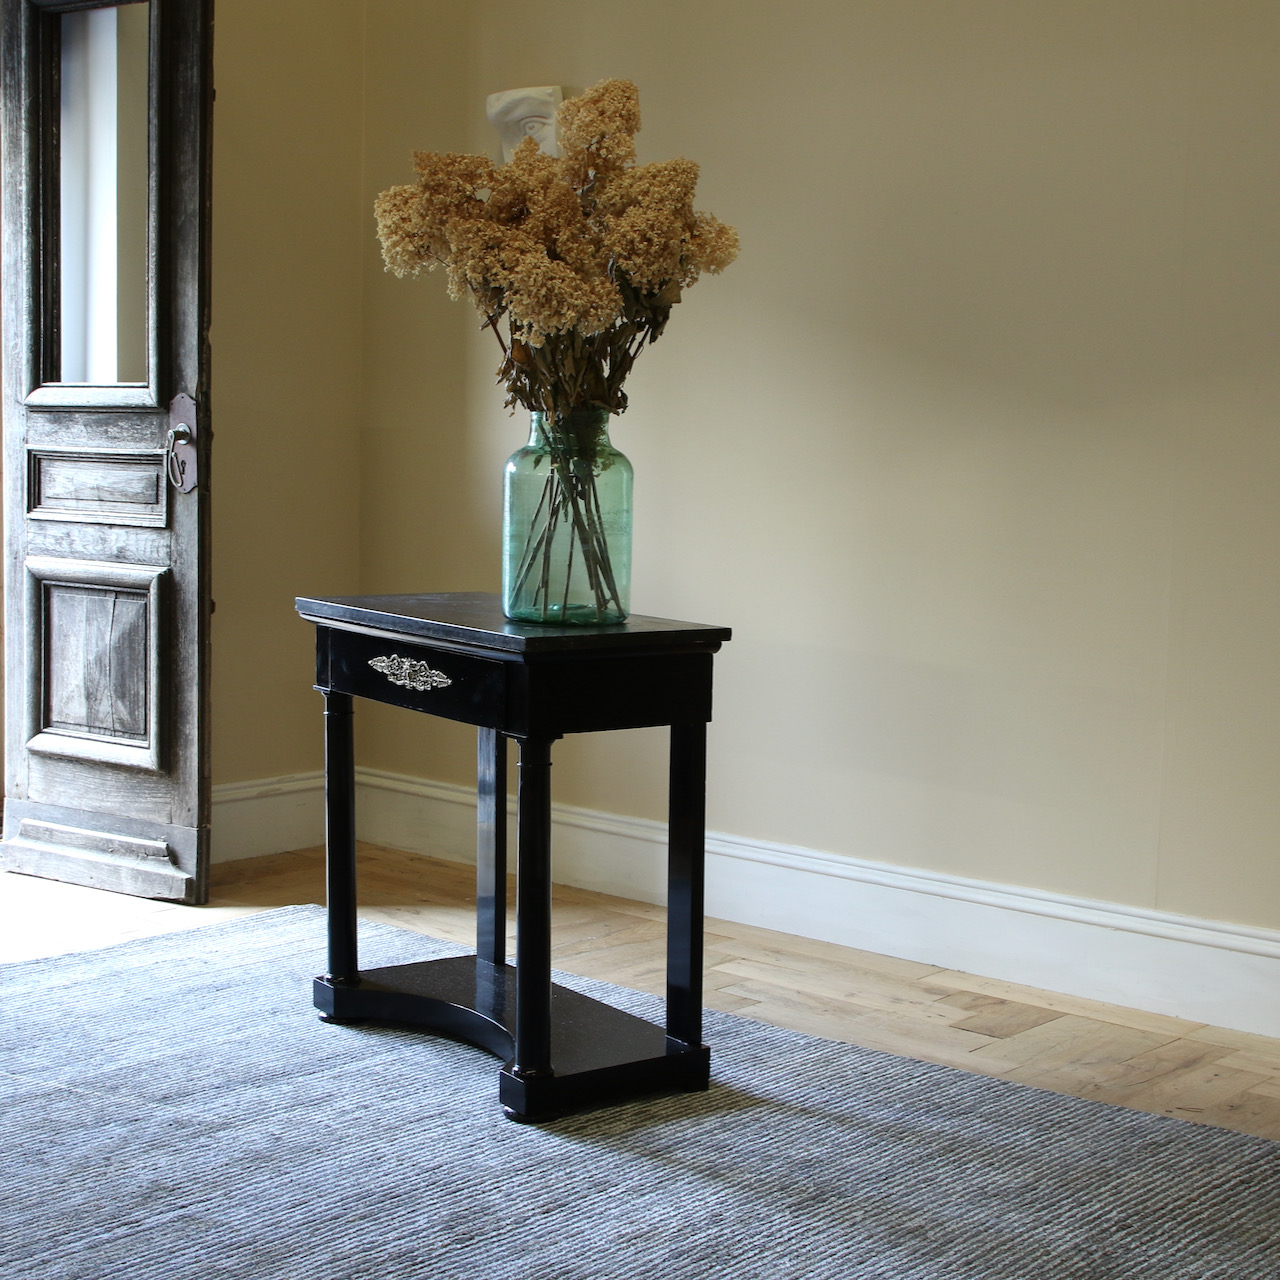 An Ebonised Empire Console